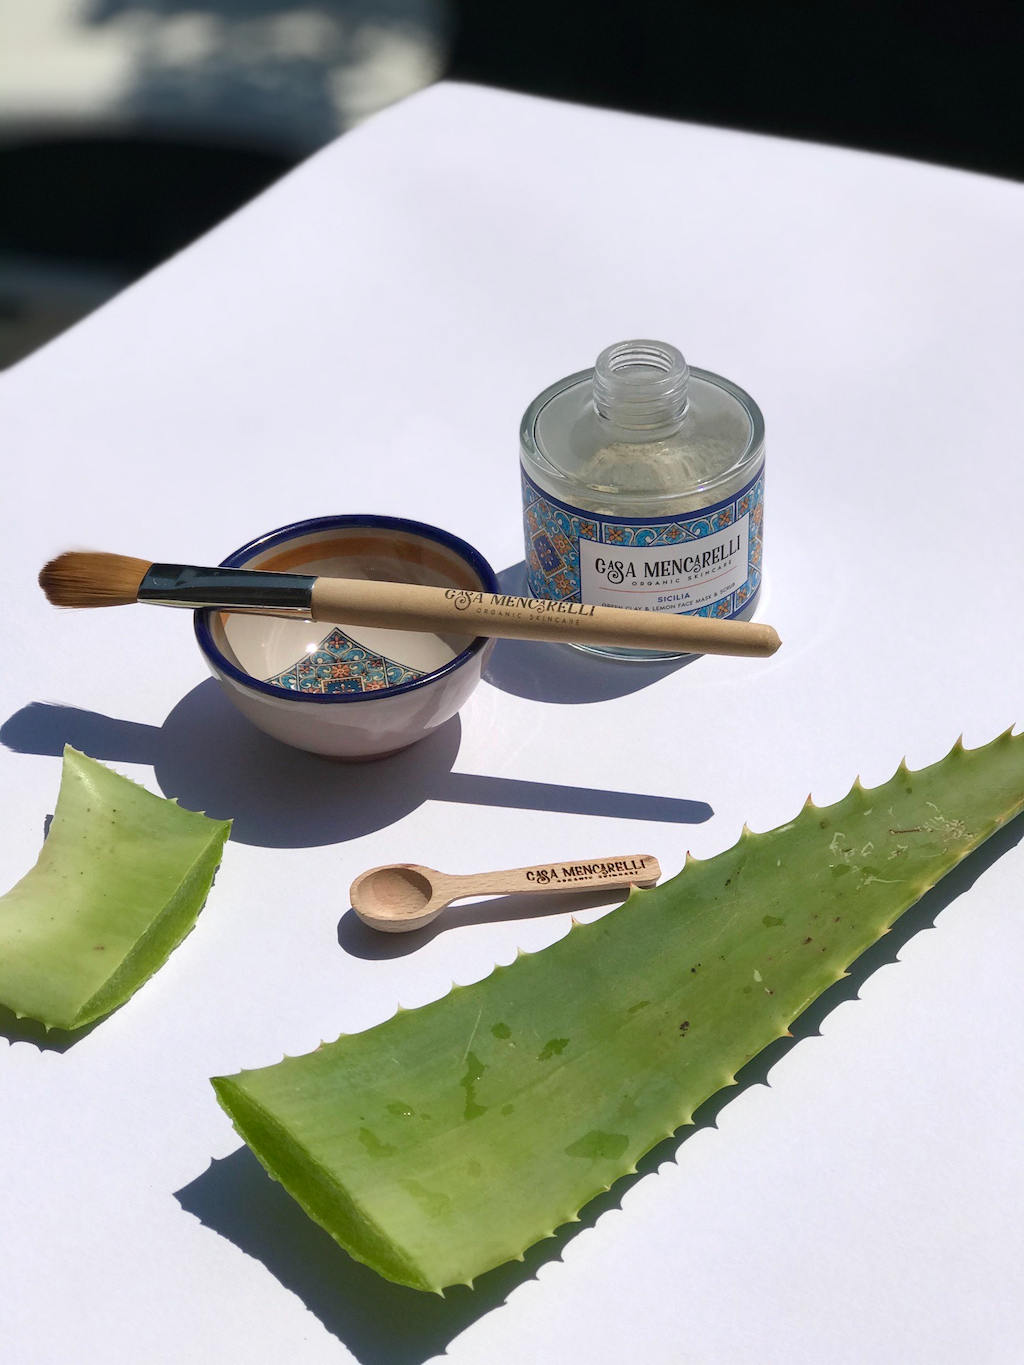 Casa Mencarelli Sicilia Green Clay & Lemon Face Mask & Scrub. Vegan face scrub. The mask jar is pictured next to an empty Casa Mencarelli mask bowl with a mask brush sitting on top and a cut aloe leaf next to them.